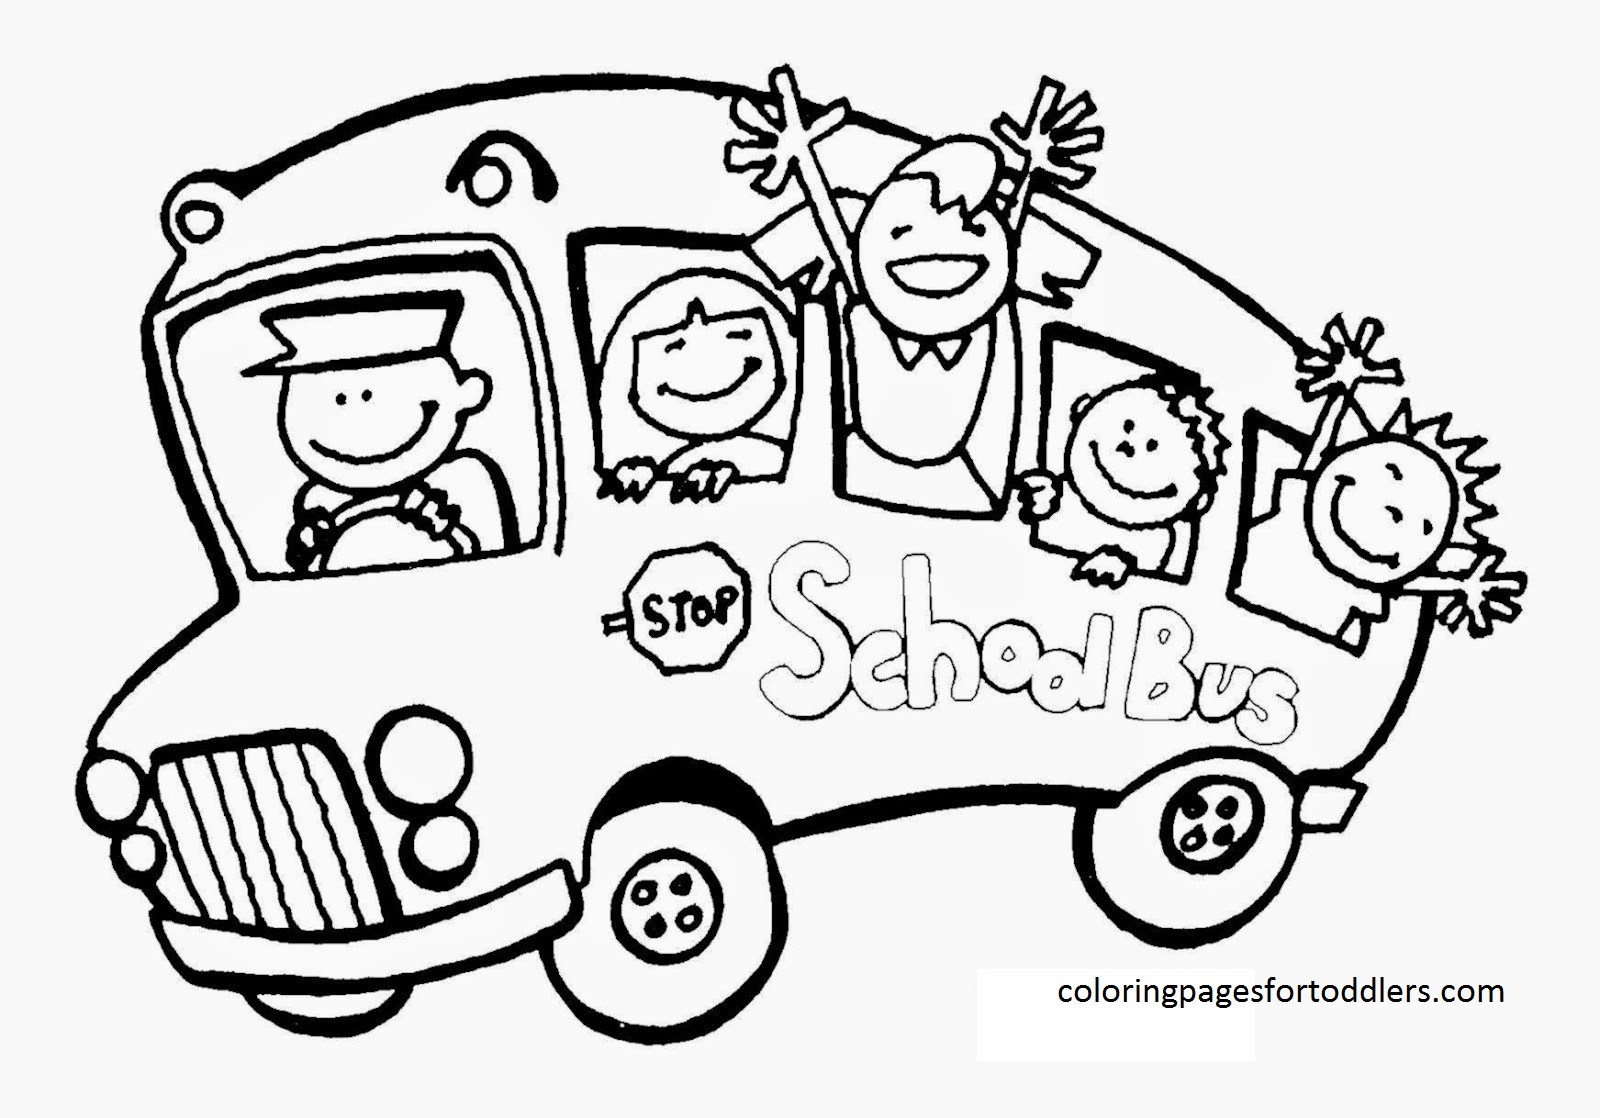 school-bus-goes-to-school-coloring-pages